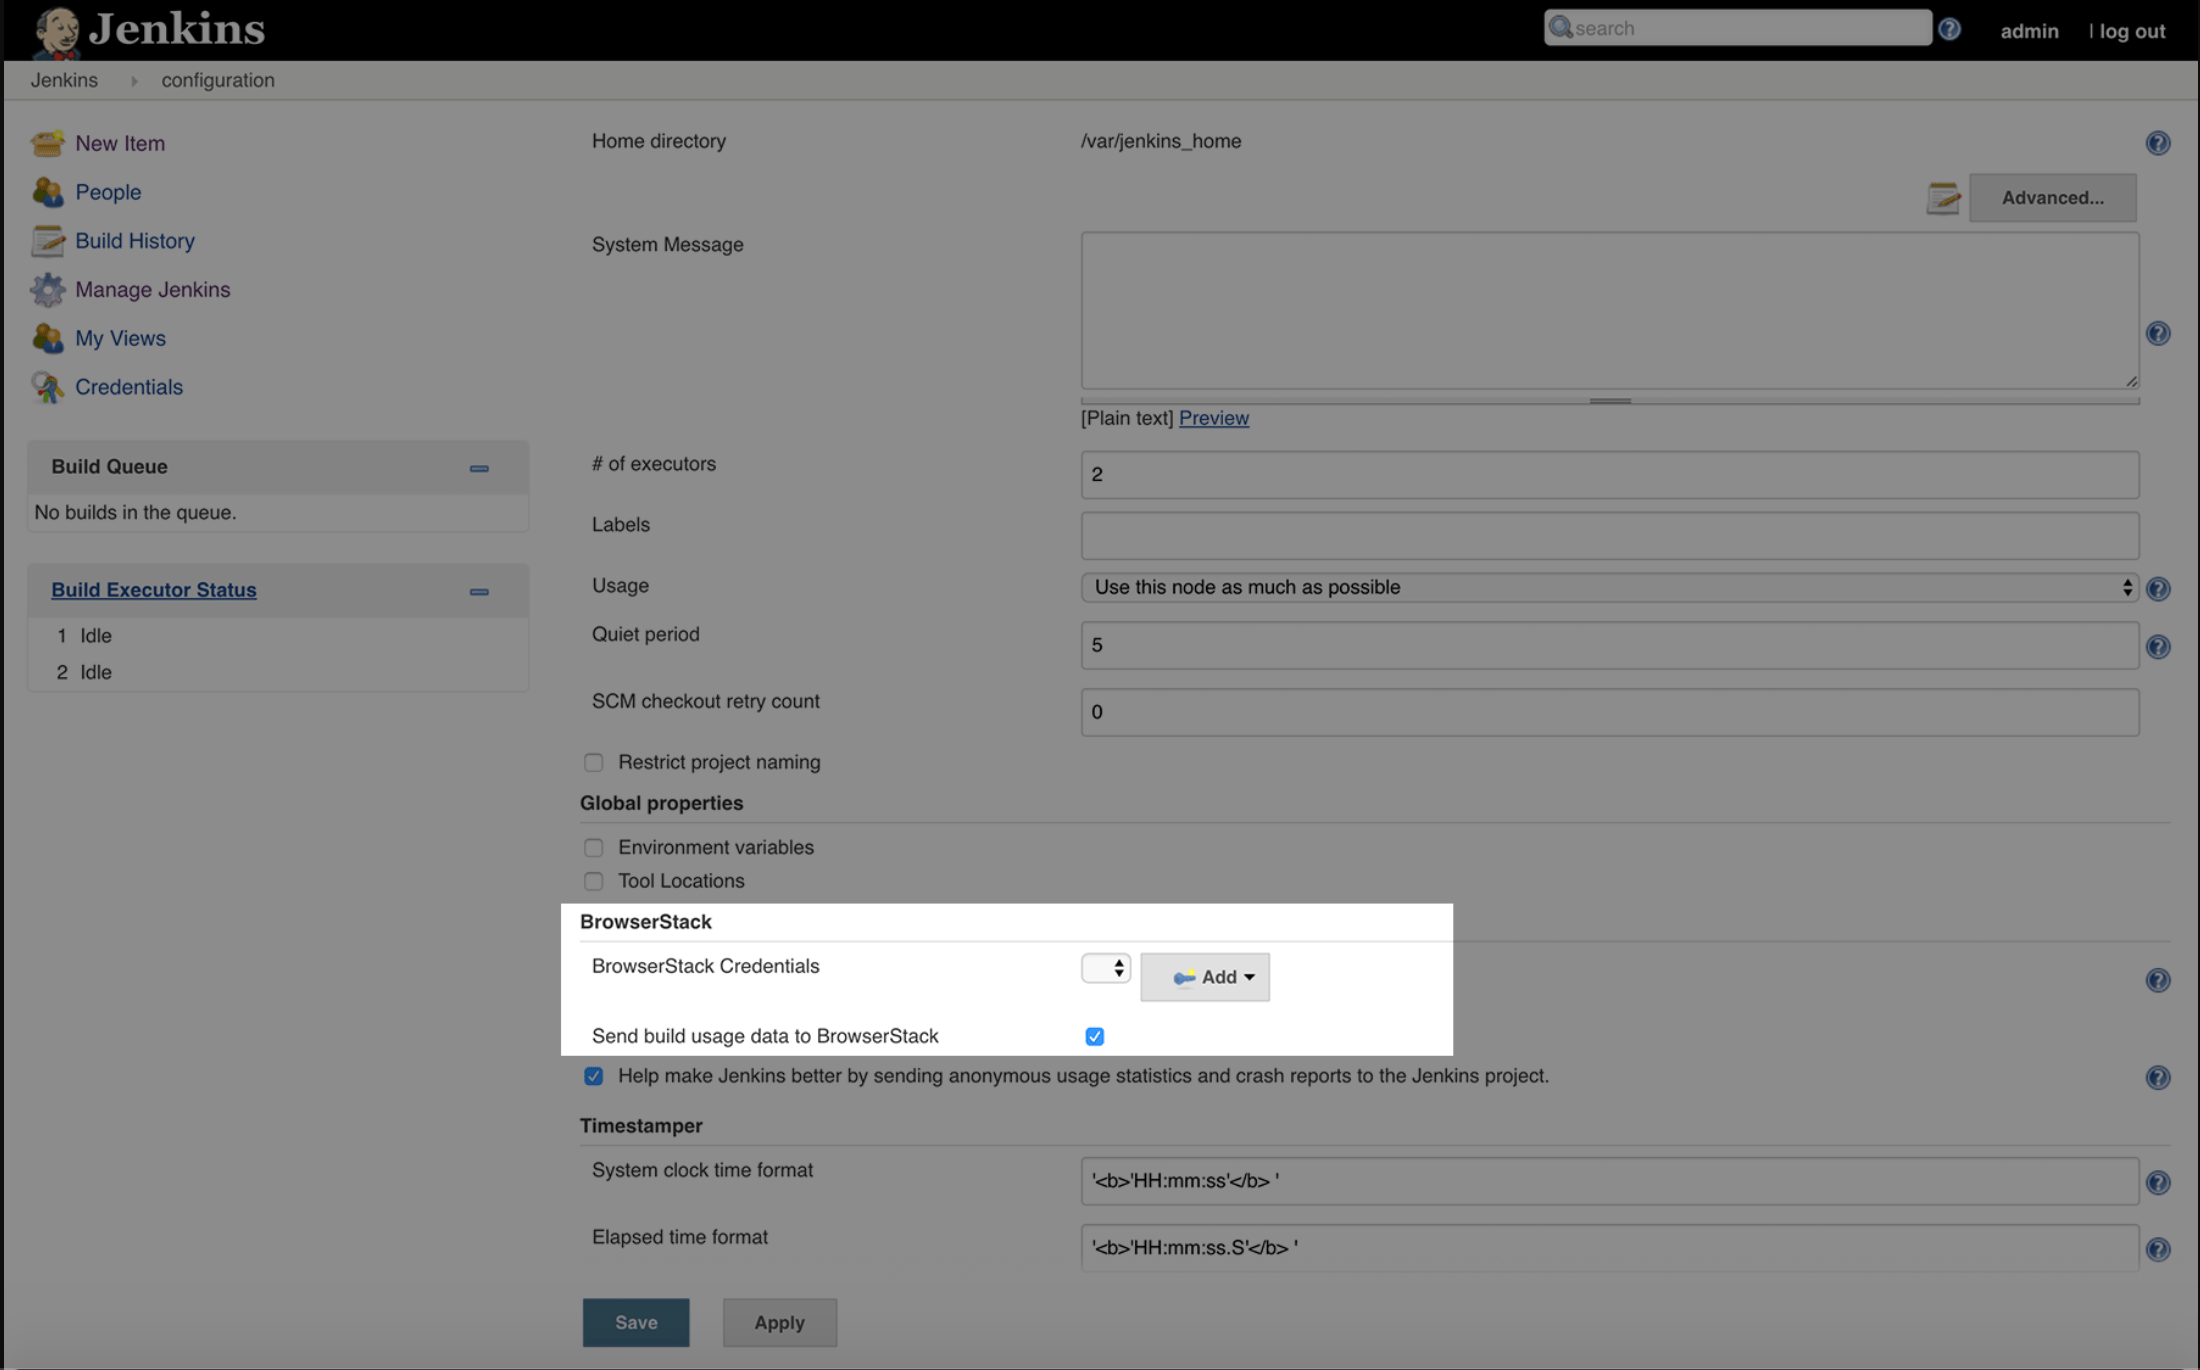 Enter your BrowserStack Username and Access Key which you can find on your BrowserStack Account Settings page